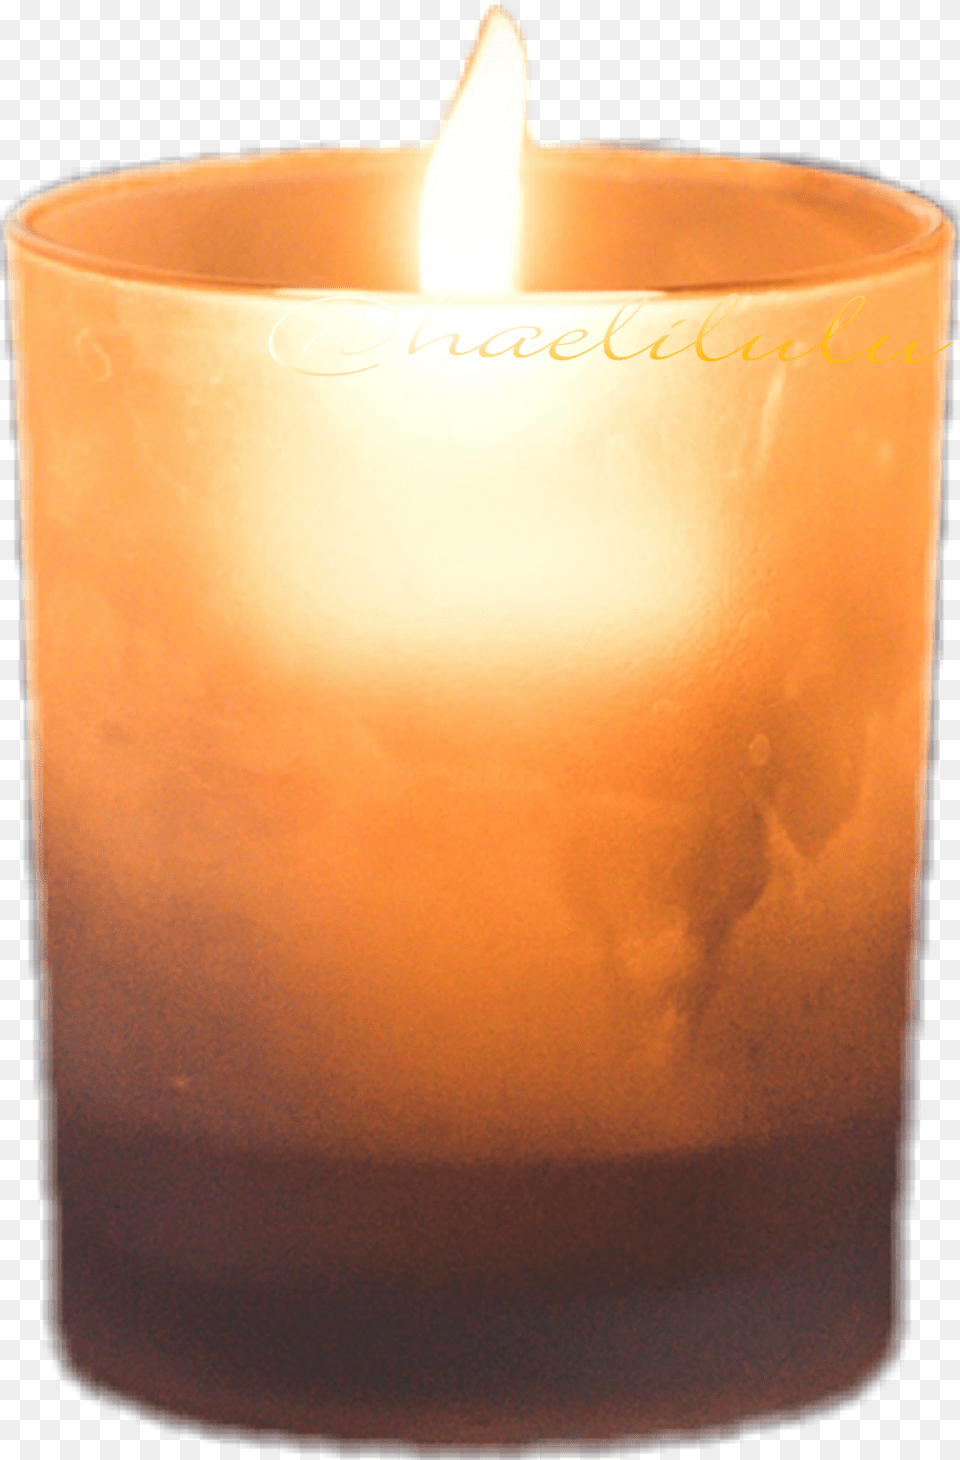 Candle Flame Png Image